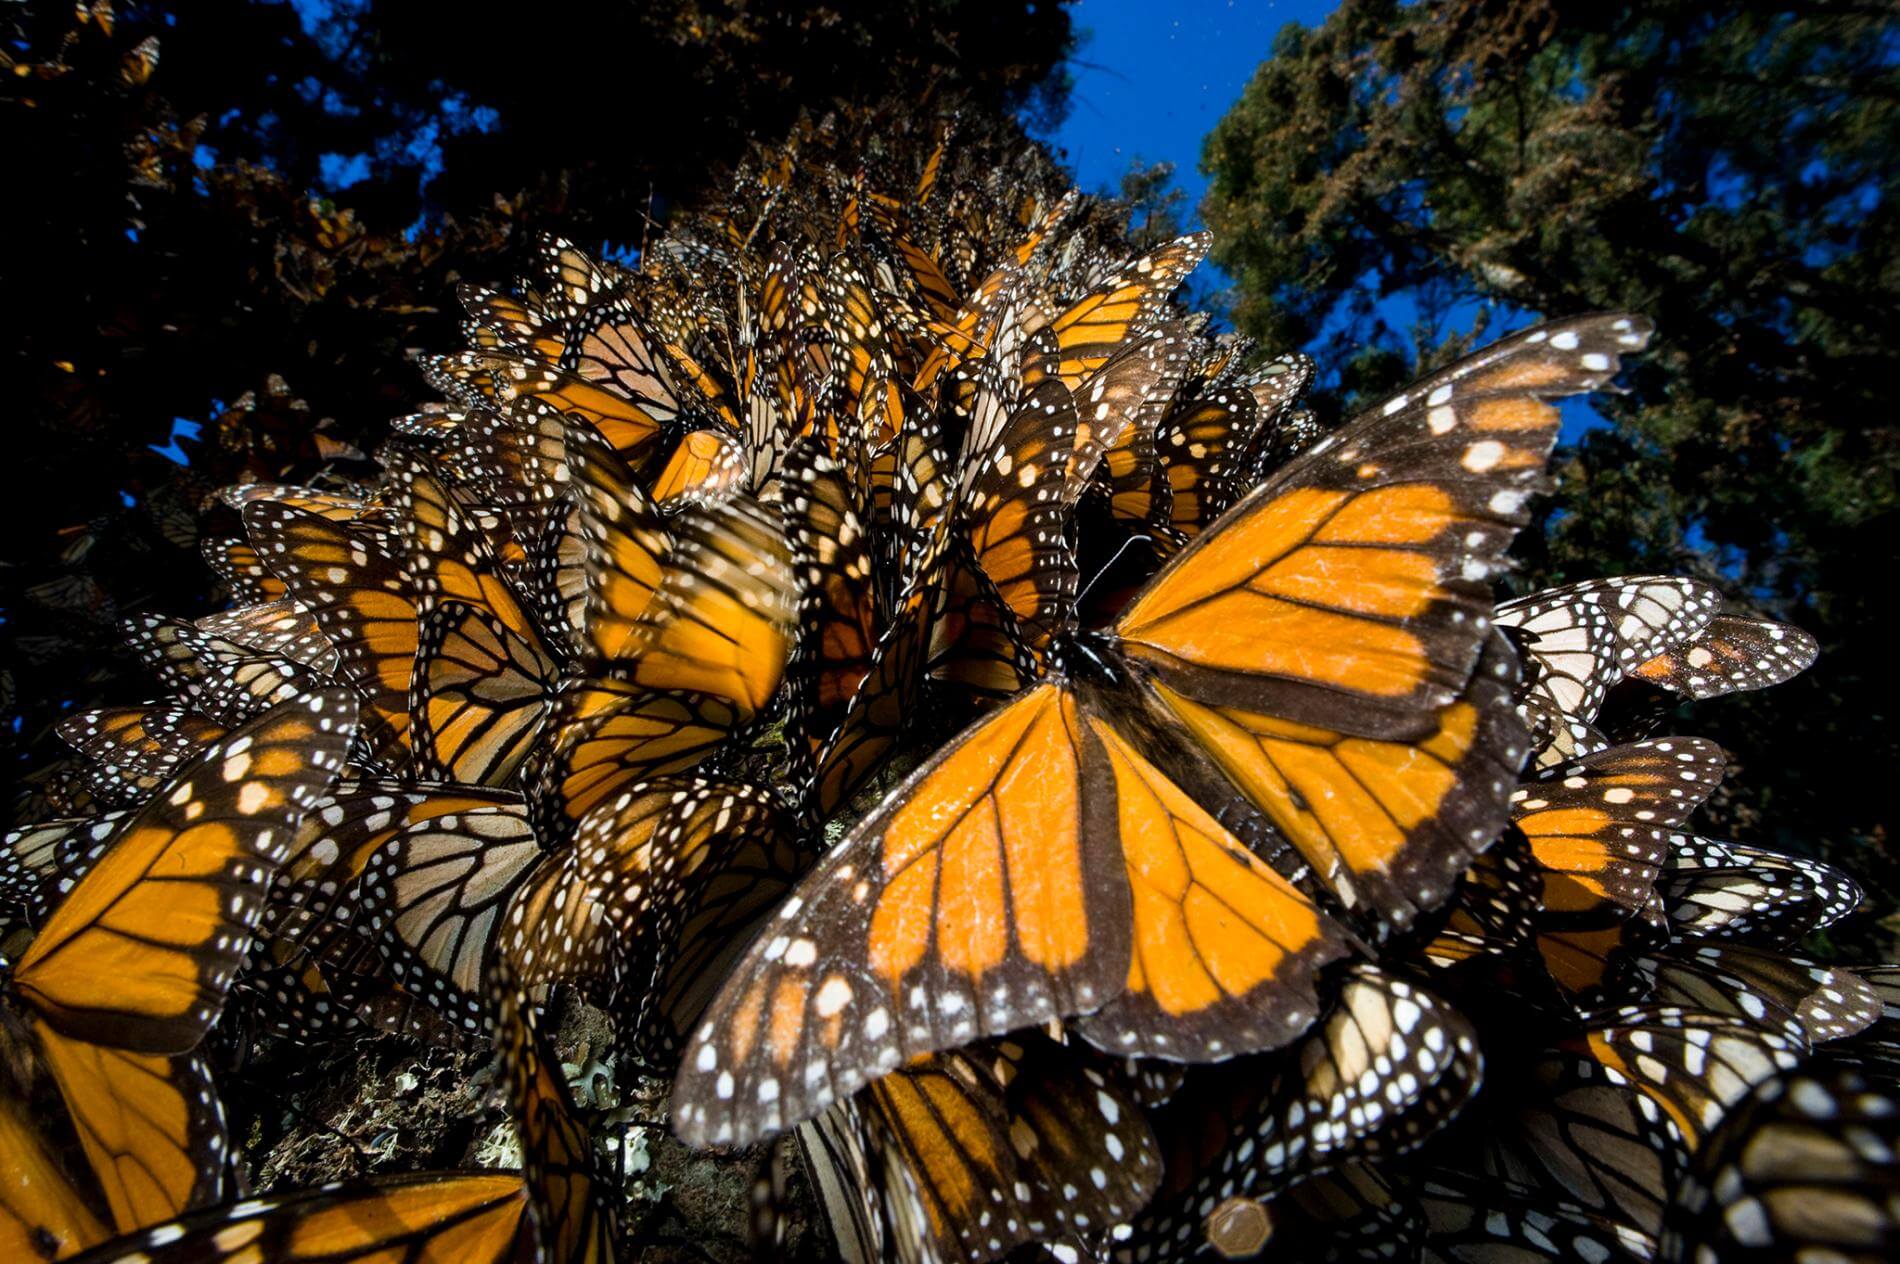 tourist places in mexico: Monarch Butterfly Migration